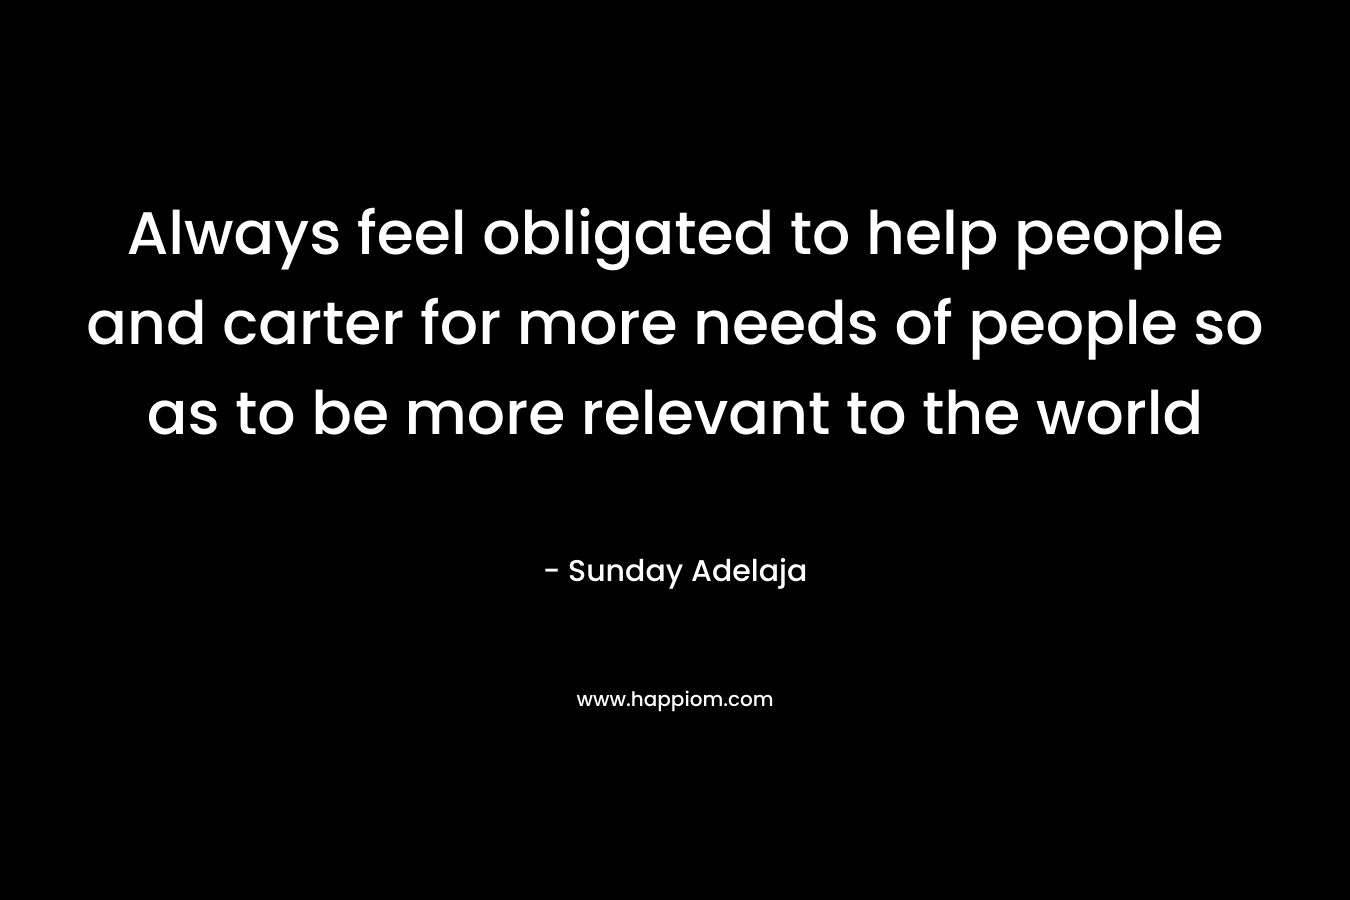 Always feel obligated to help people and carter for more needs of people so as to be more relevant to the world